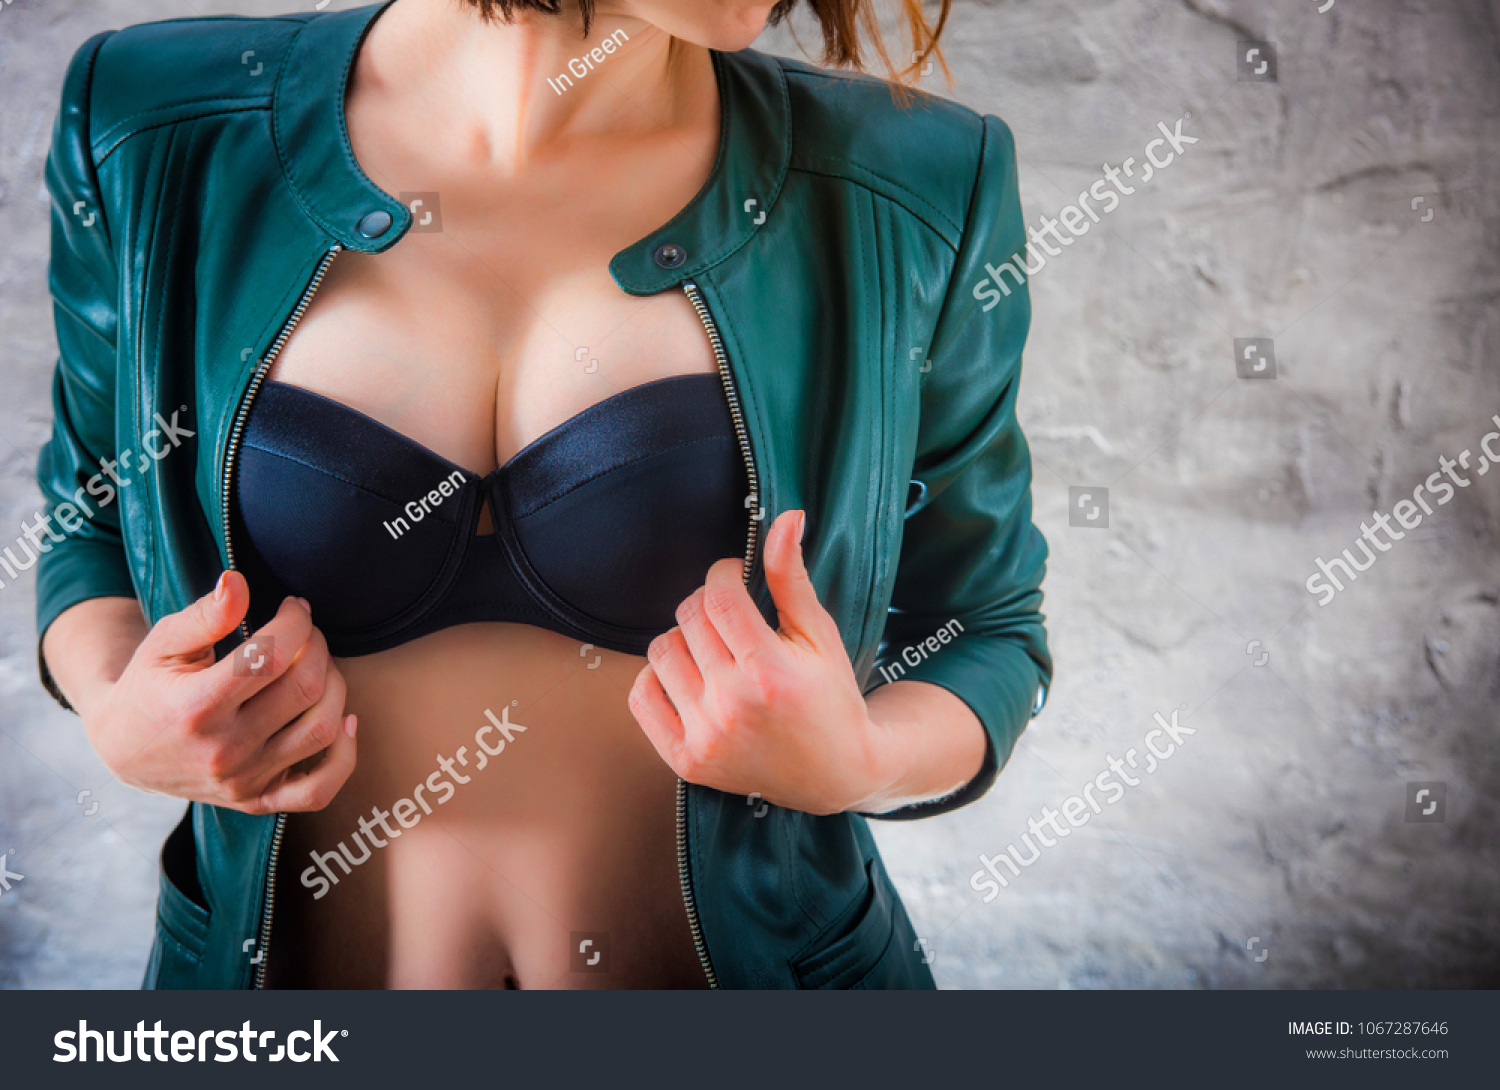 Sexy Female Breast Attractive Womans Body Stock Photo Edit Now 1067287646